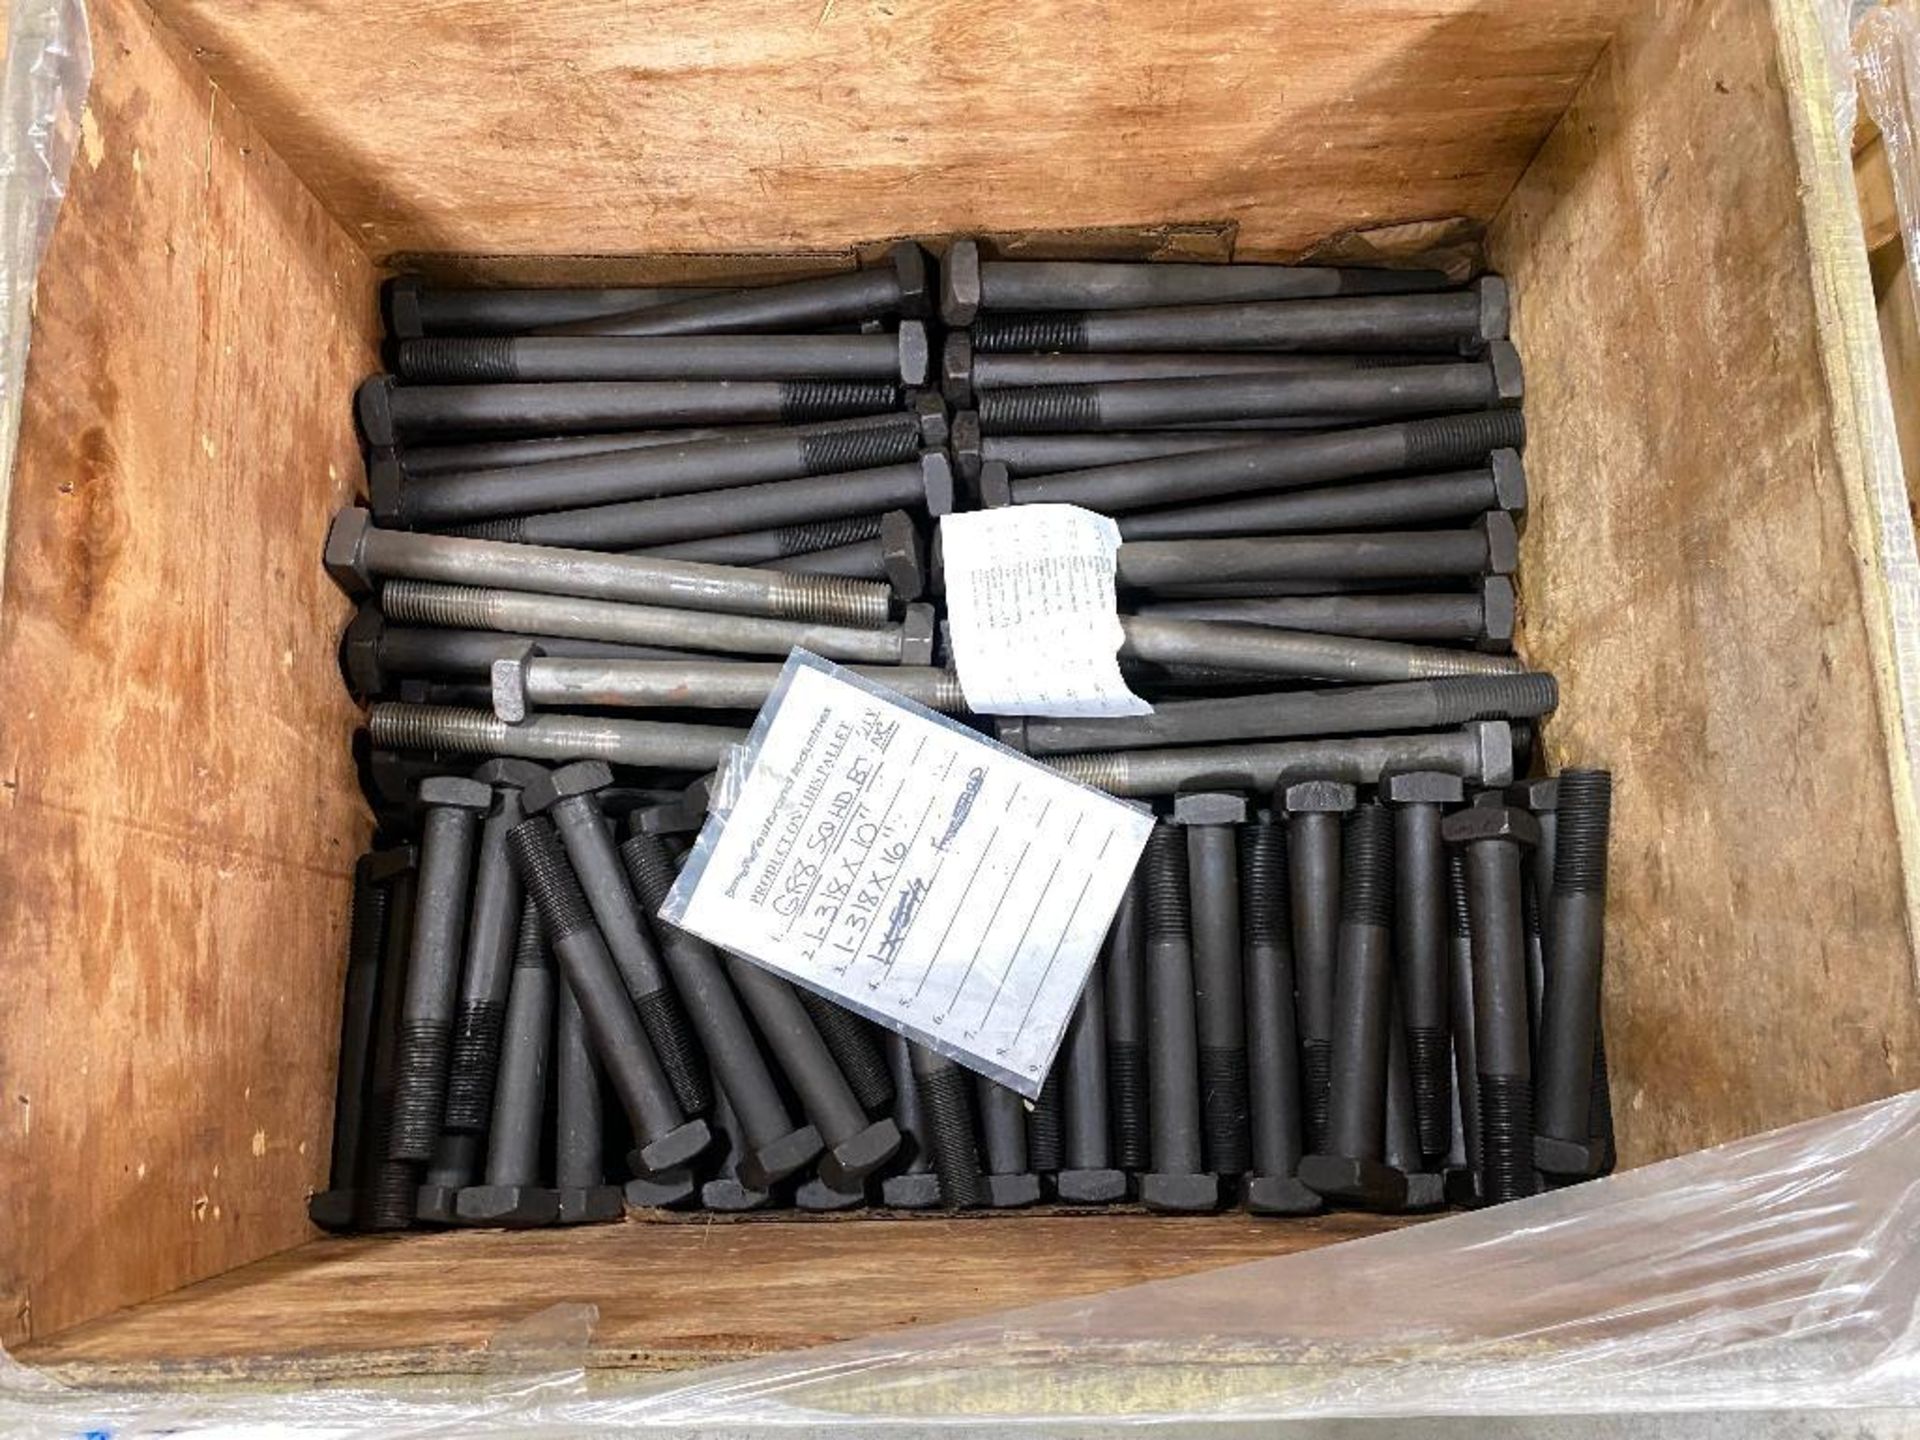 Crate of Asst. 1-3/8" x 10" & 1-3/8" x 16" Square Heavy Duty Bolts - Image 2 of 3